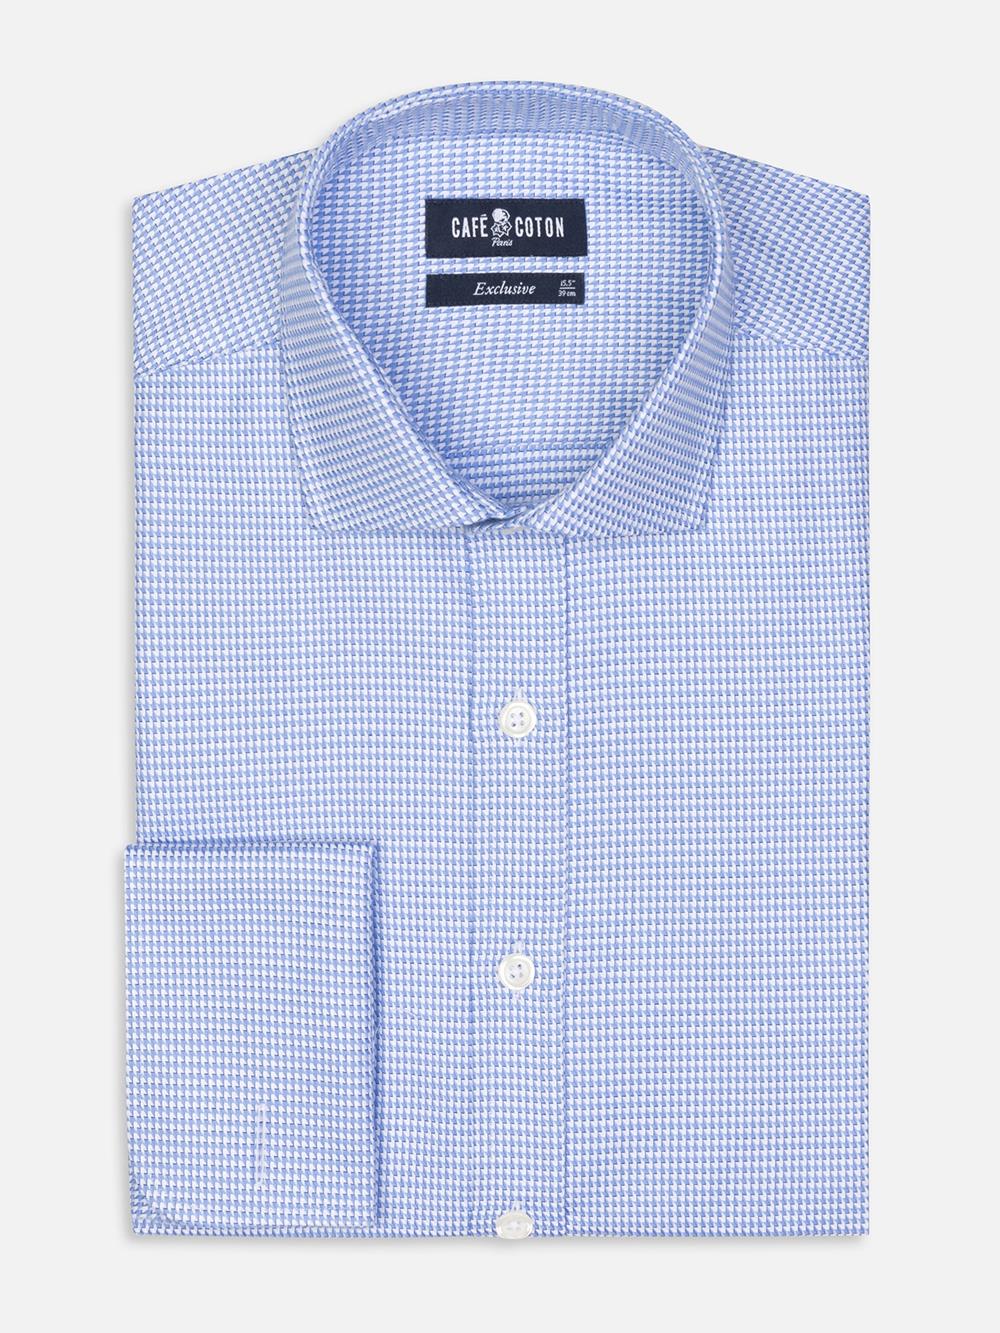 Willy sky twill shirt - Double Cuffs